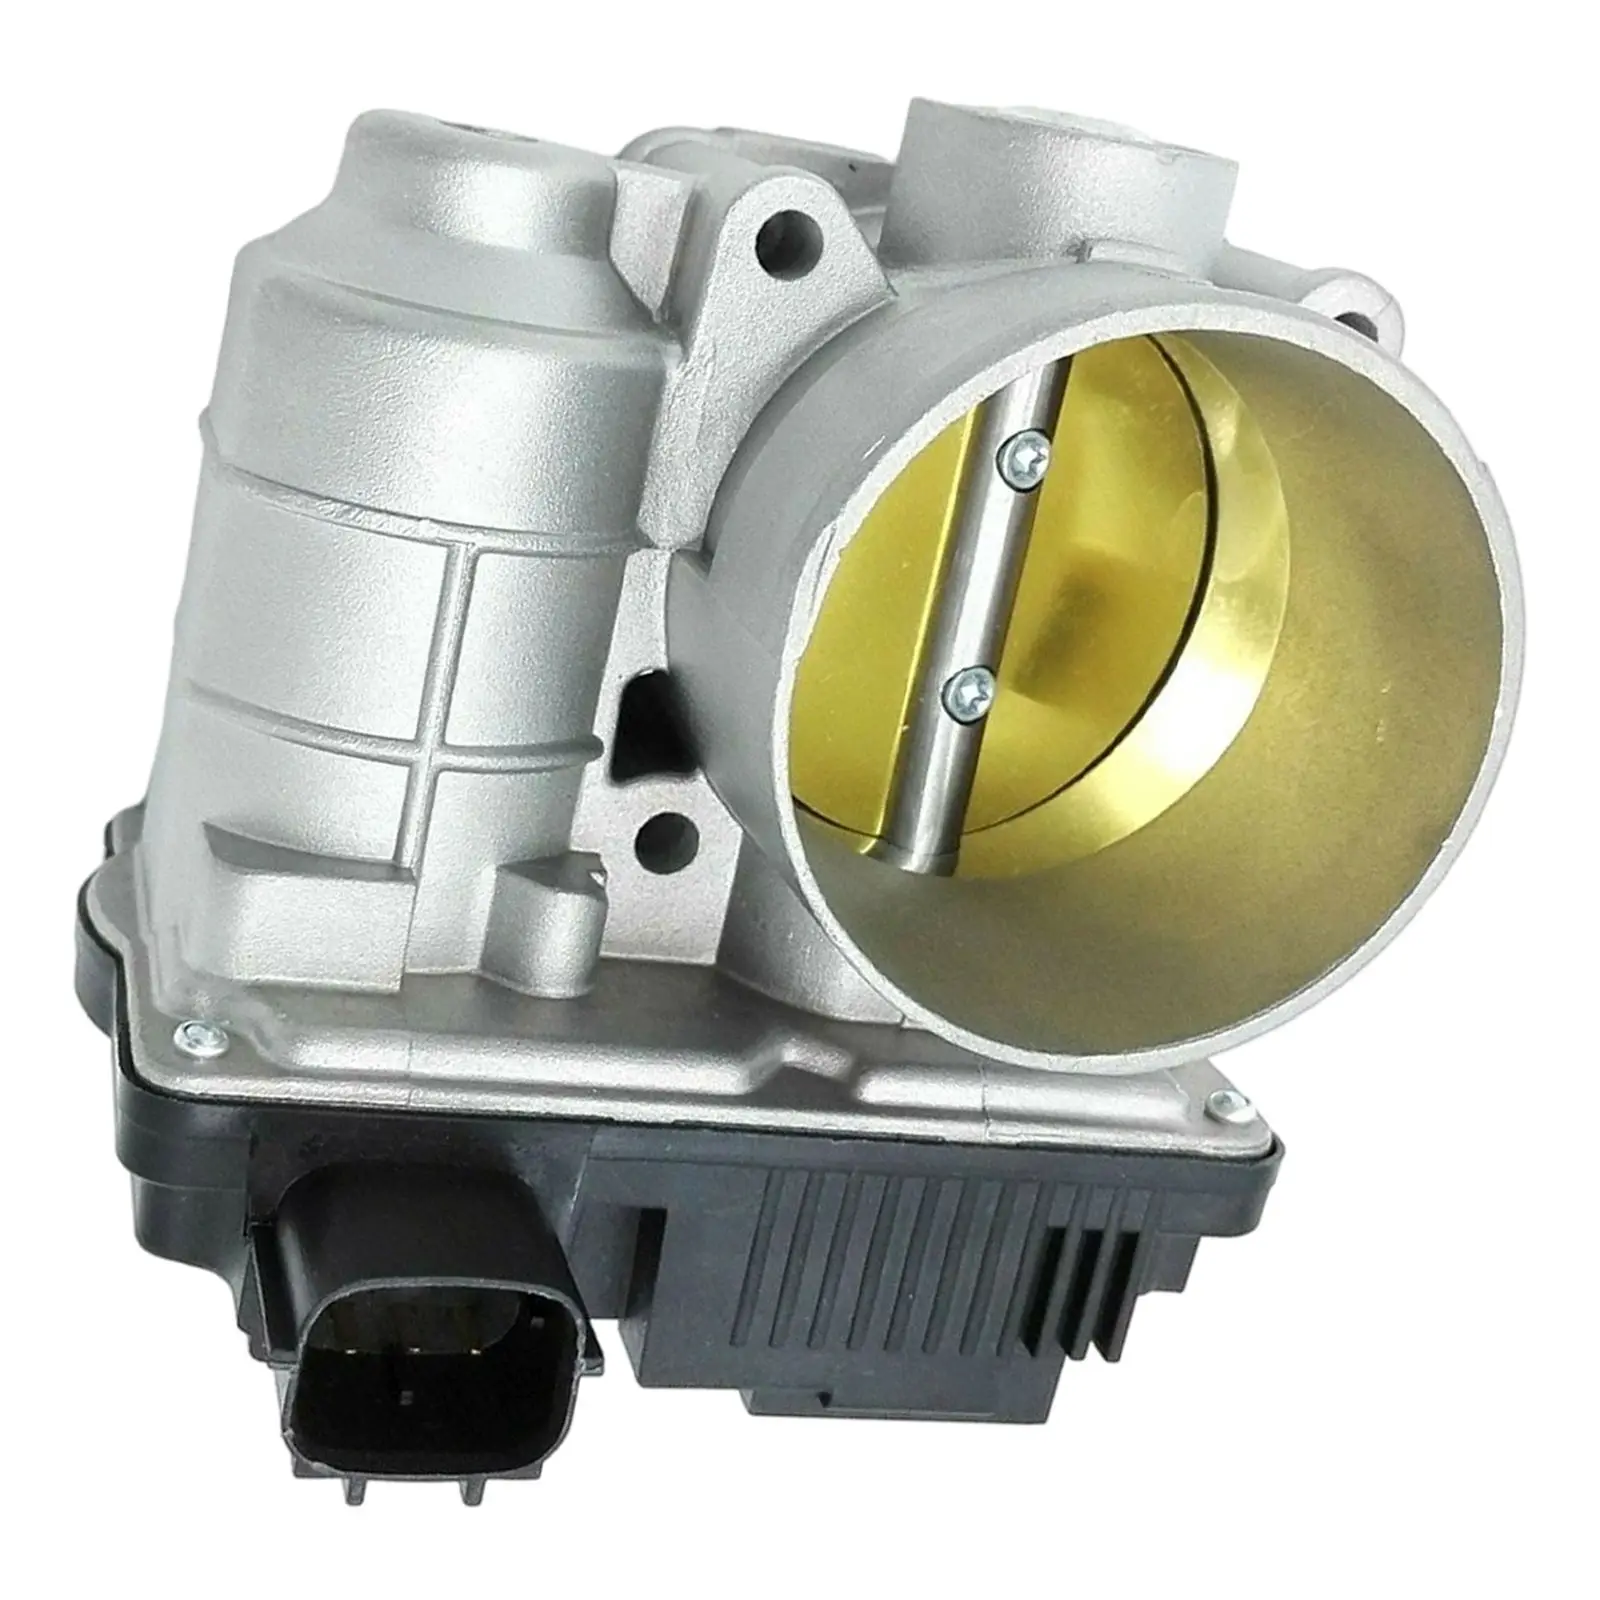 Idle Air Control Sensor Sera576-01 Electronic Aembly Fuel Injection, Throttle Body for  Acceeries ,16119-AU003, 16119-AU00A